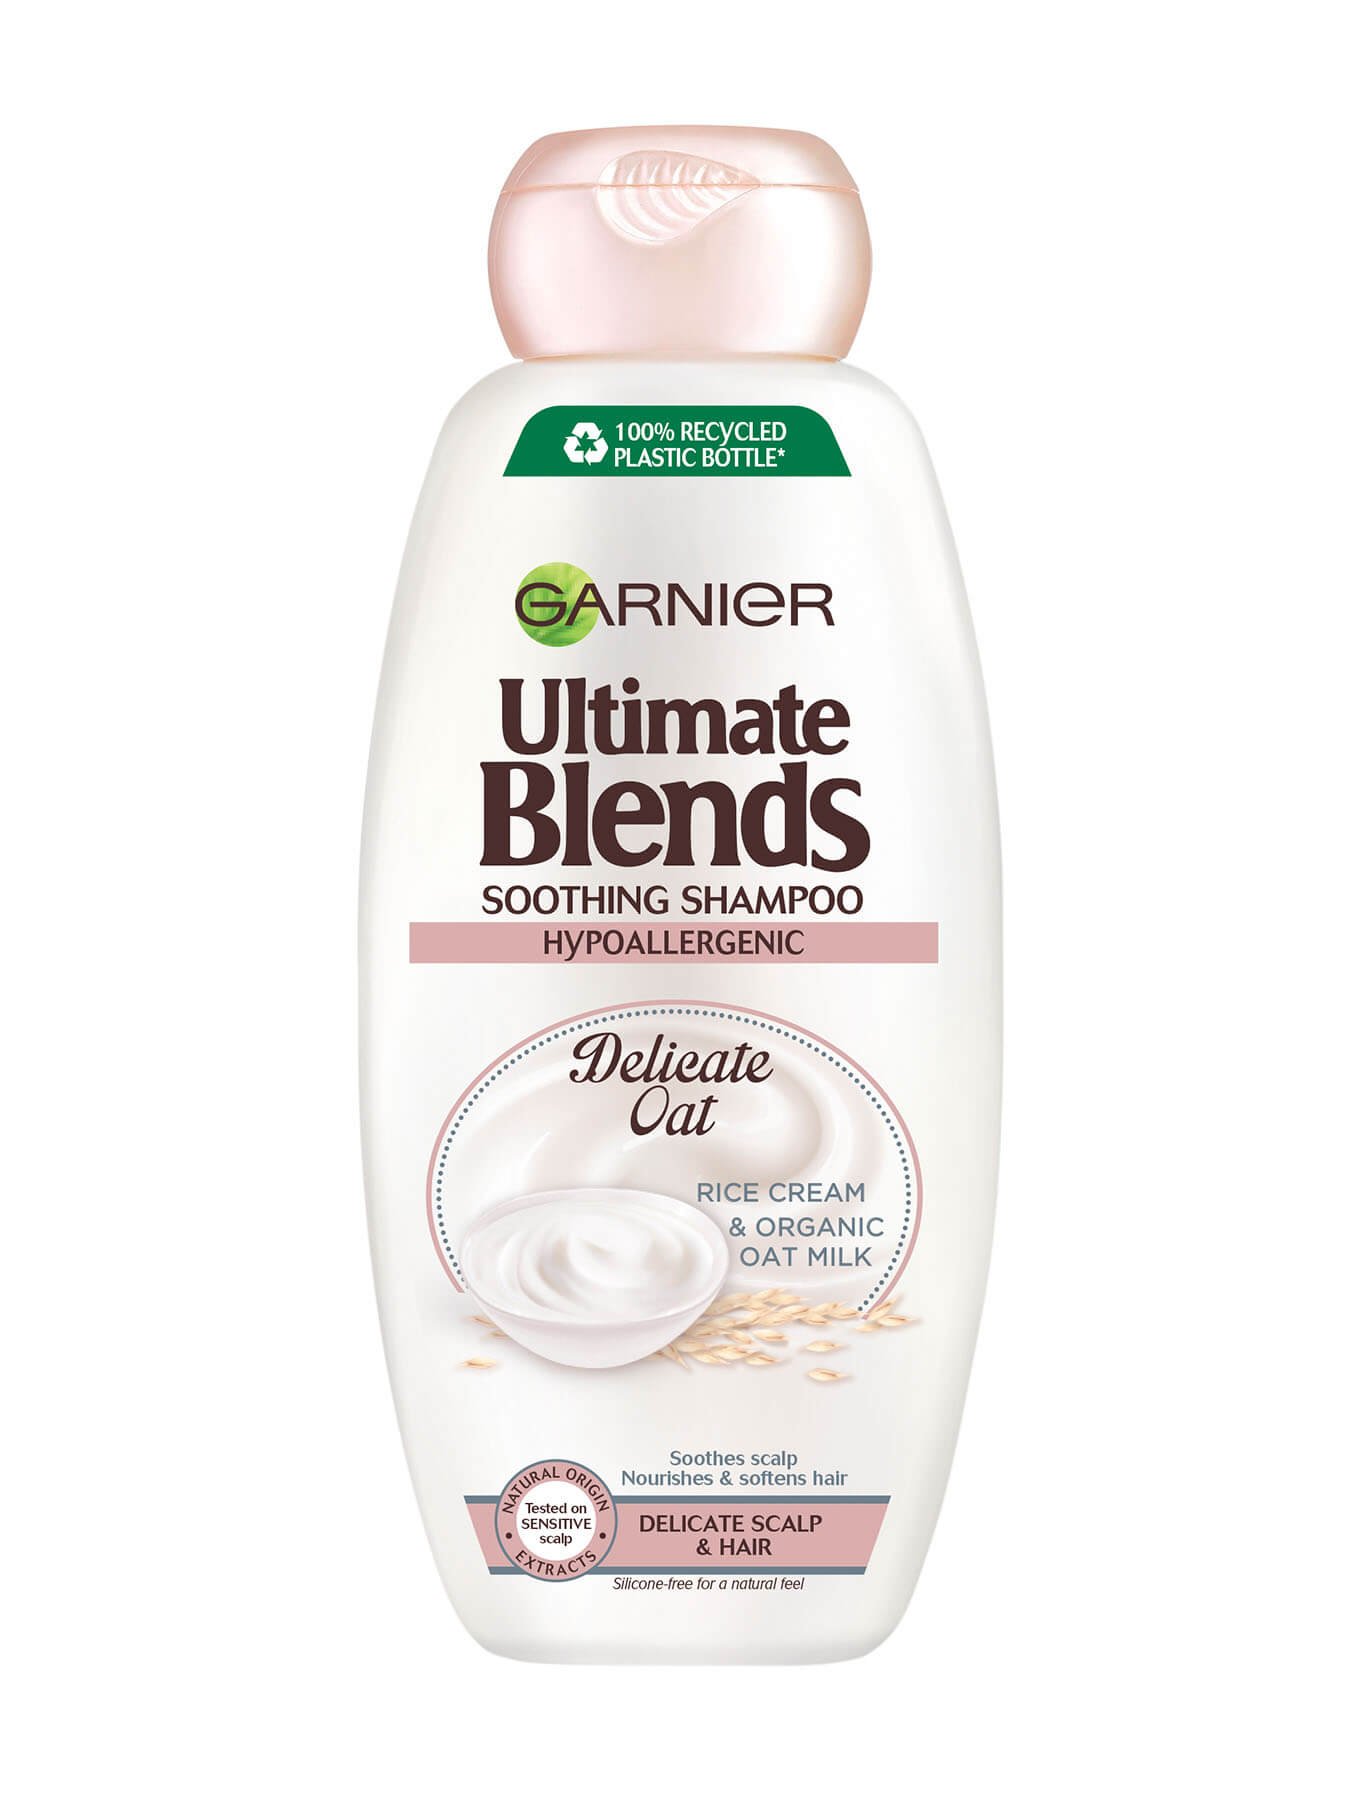 Ultimate Blends Delicate Oat shampoo front of pack